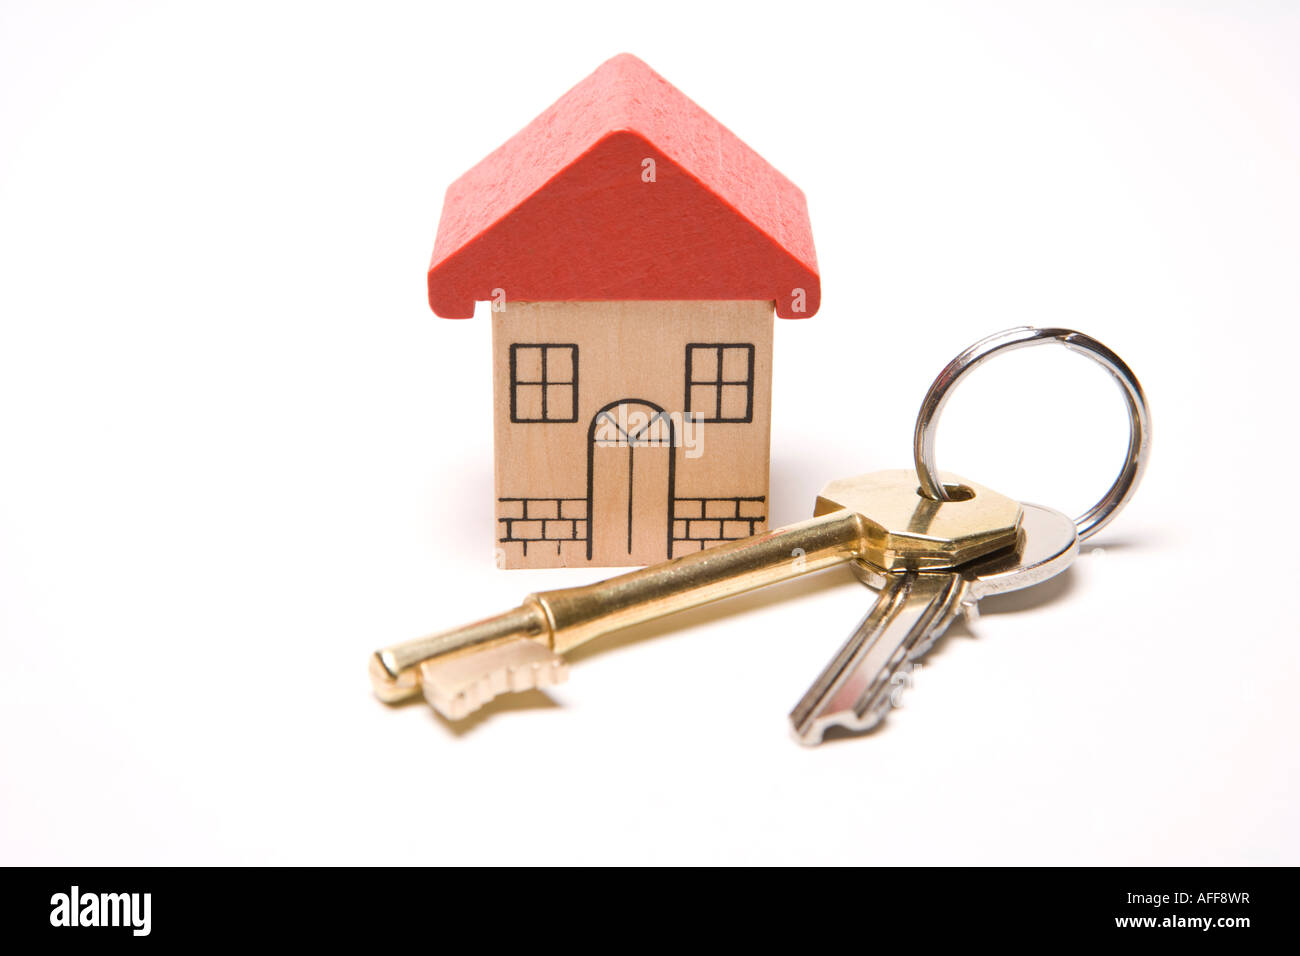 Security keys to locks of home or property Stock Photo